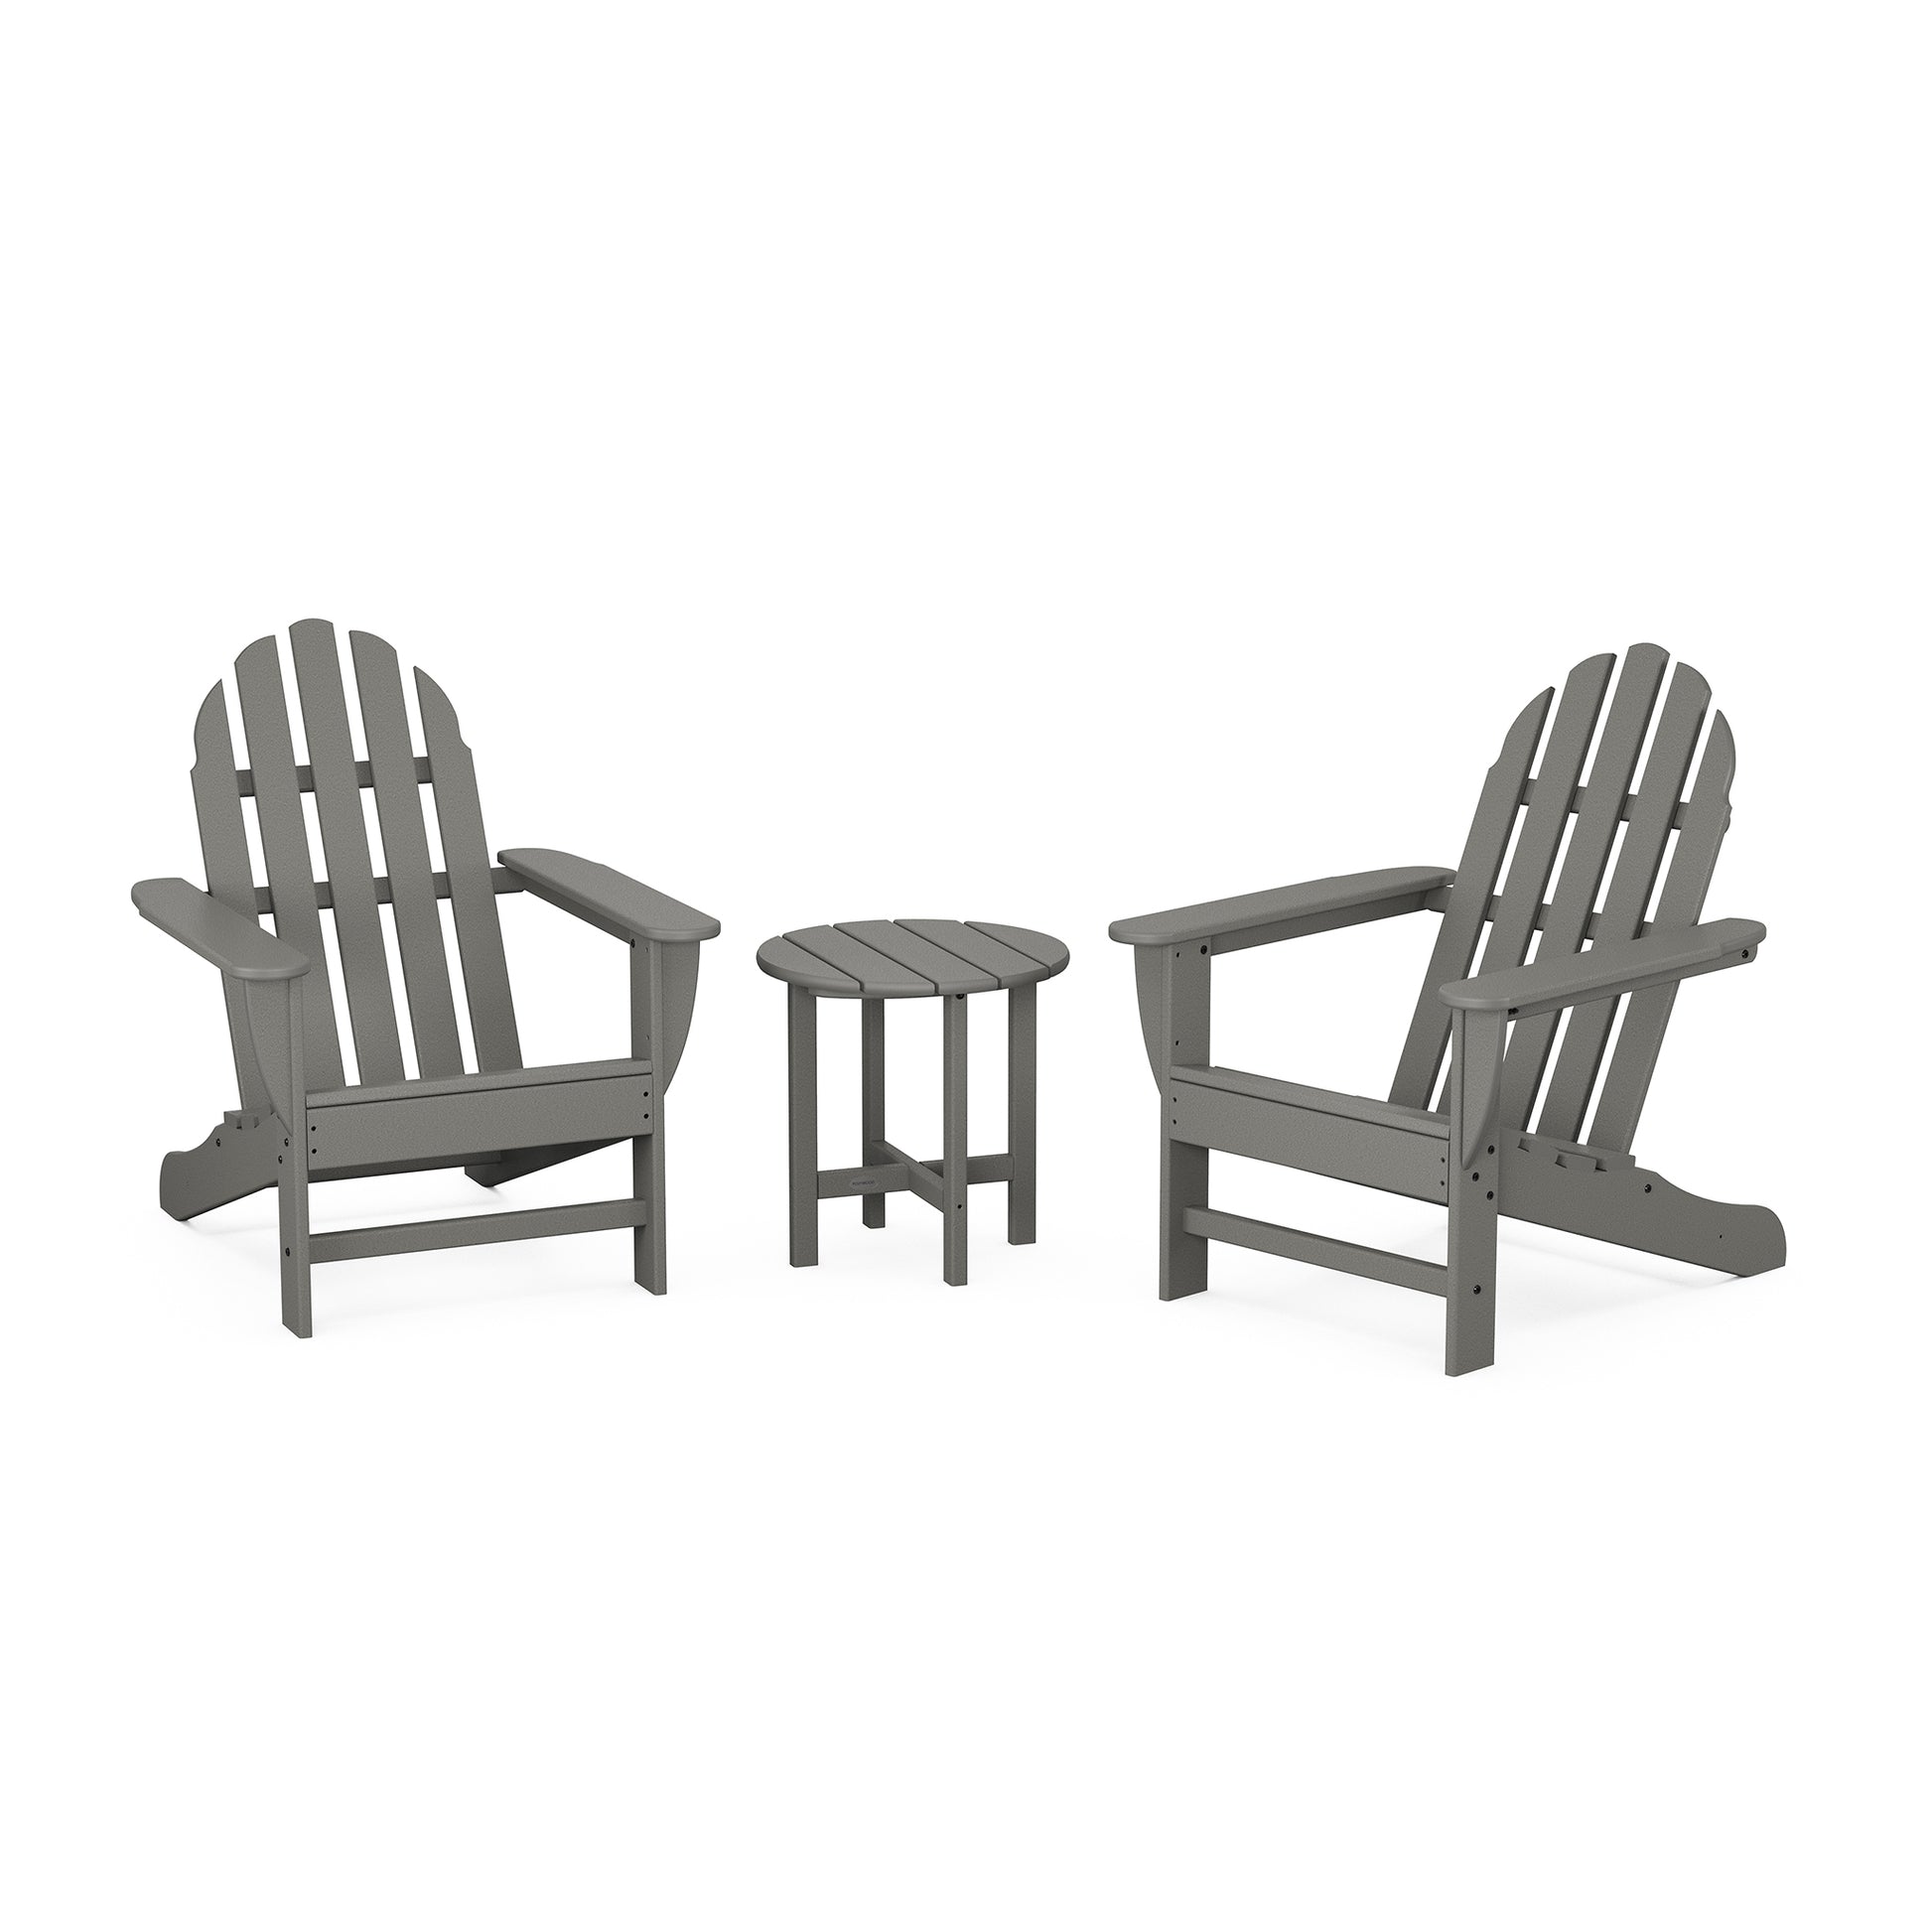 Two gray POLYWOOD Classic Adirondack chairs with a matching small round table between them, all set on a plain white background. The chairs feature a classic slatted design and are part of the POLYWOOD Classic Adirondack 3-Piece Set.